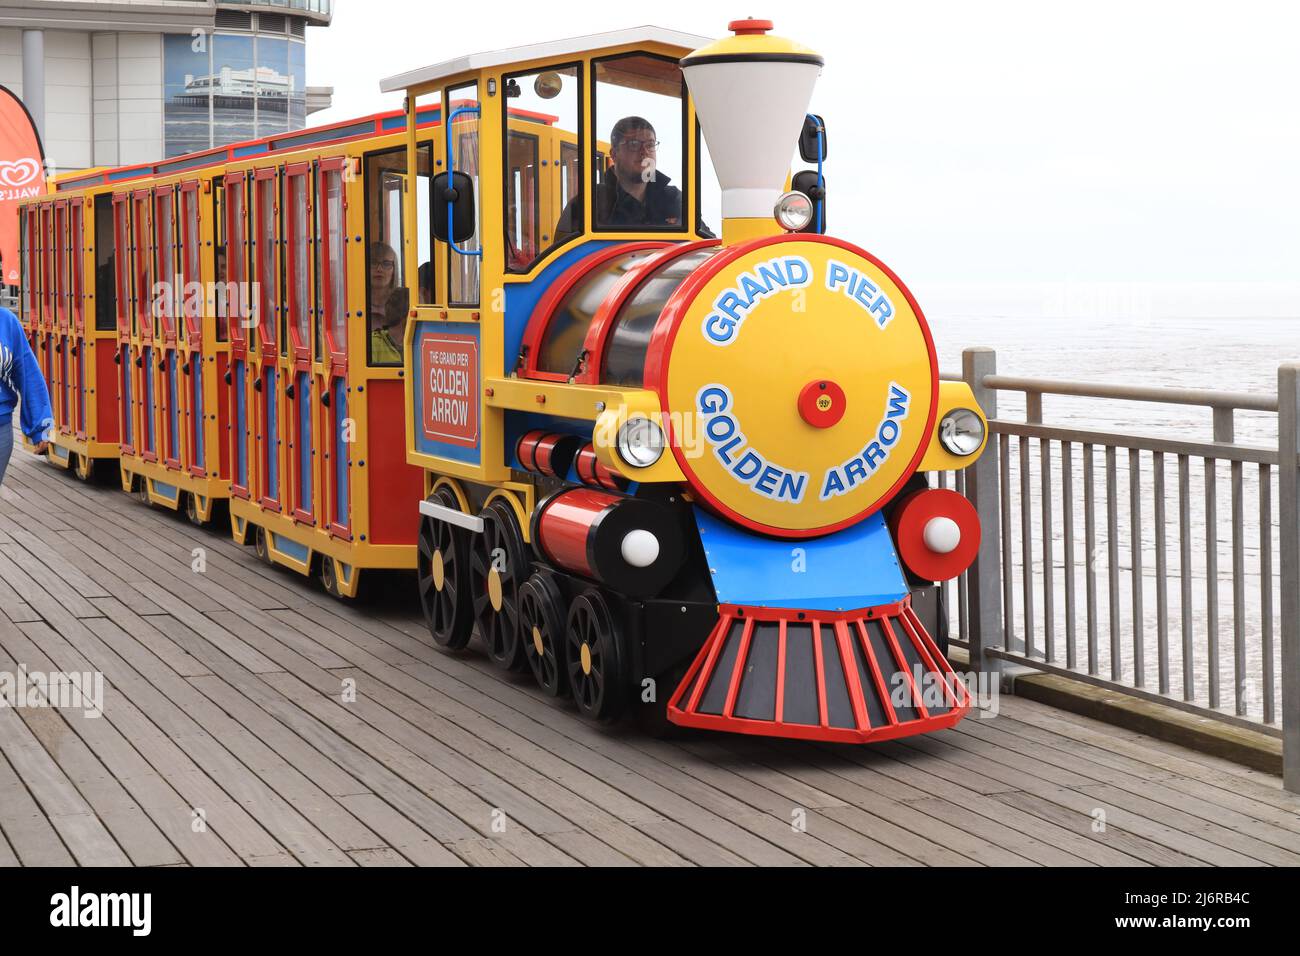 Weston-super-Mare, UK - May 2nd 2022 - Grand Pier Golden Arrow land train in transit Stock Photo